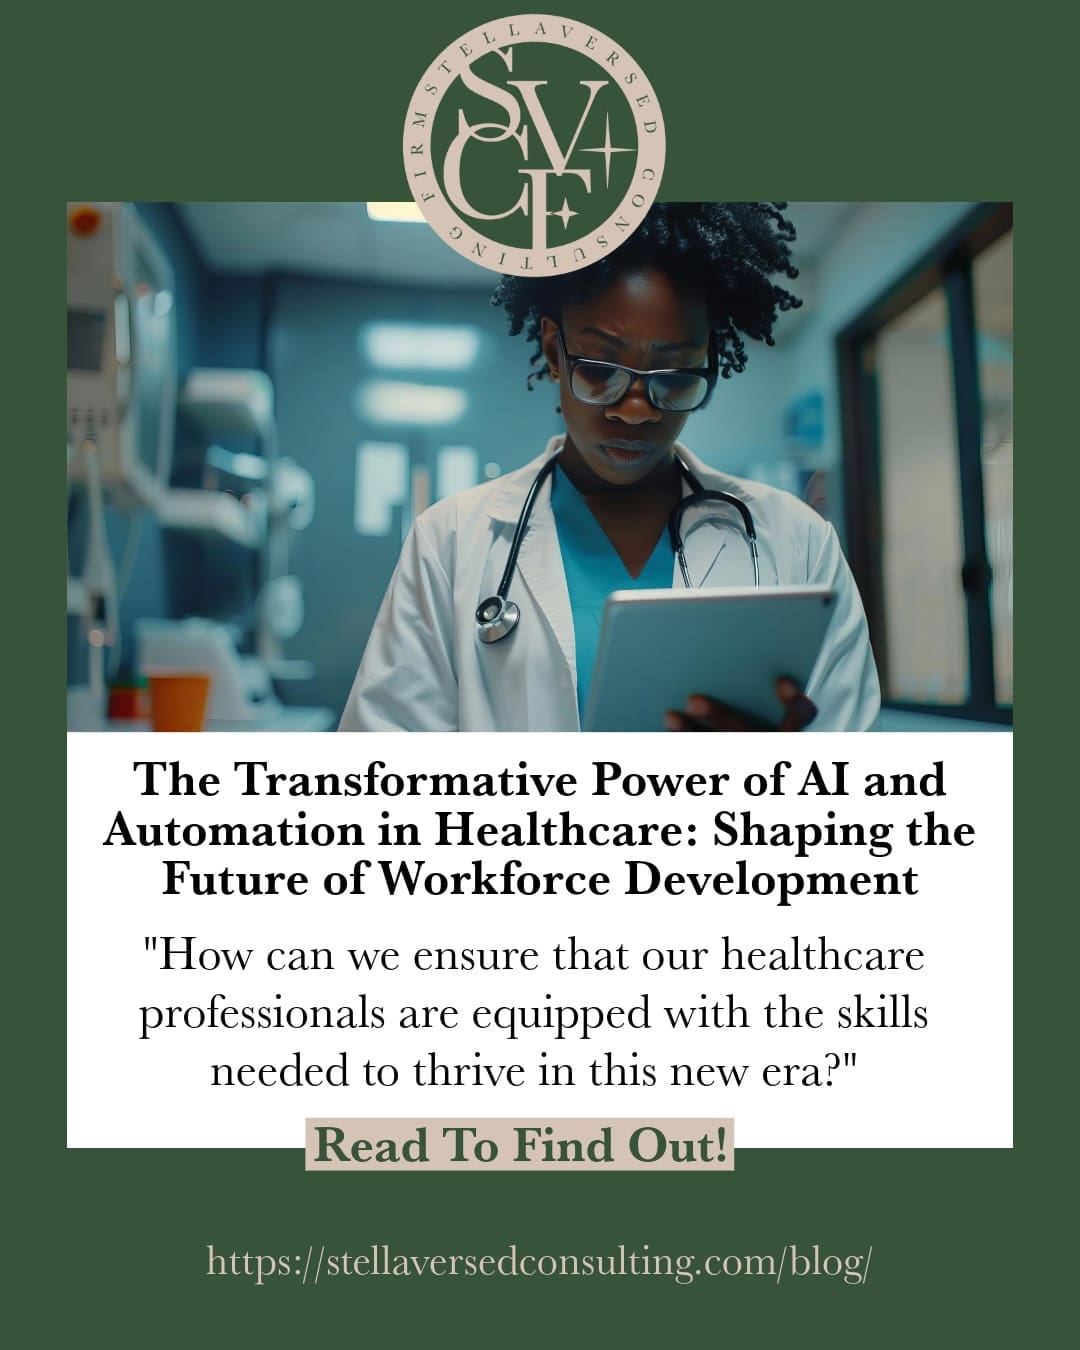 Featured image for “The Transformative Power of AI and Automation in Healthcare: Shaping the Future of Workforce Development”